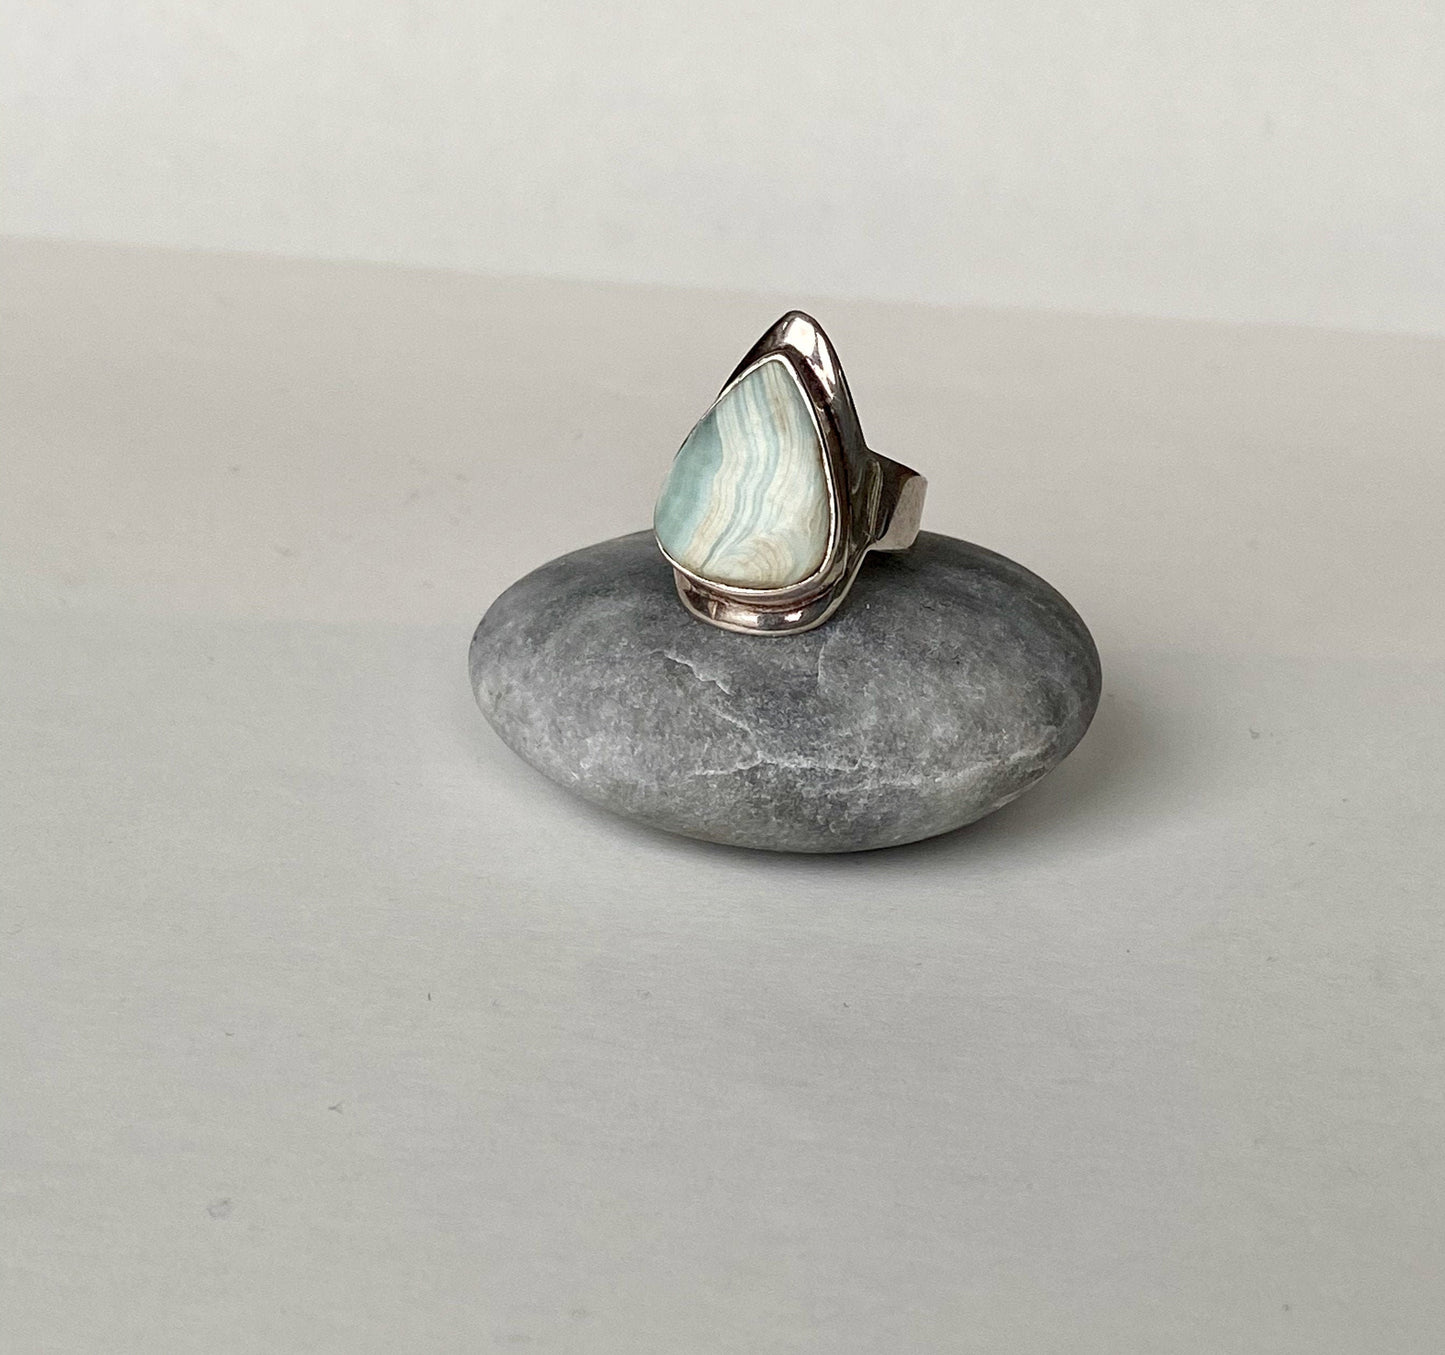 Handmade size 5 3/4" Larimar and sterling silver ring.